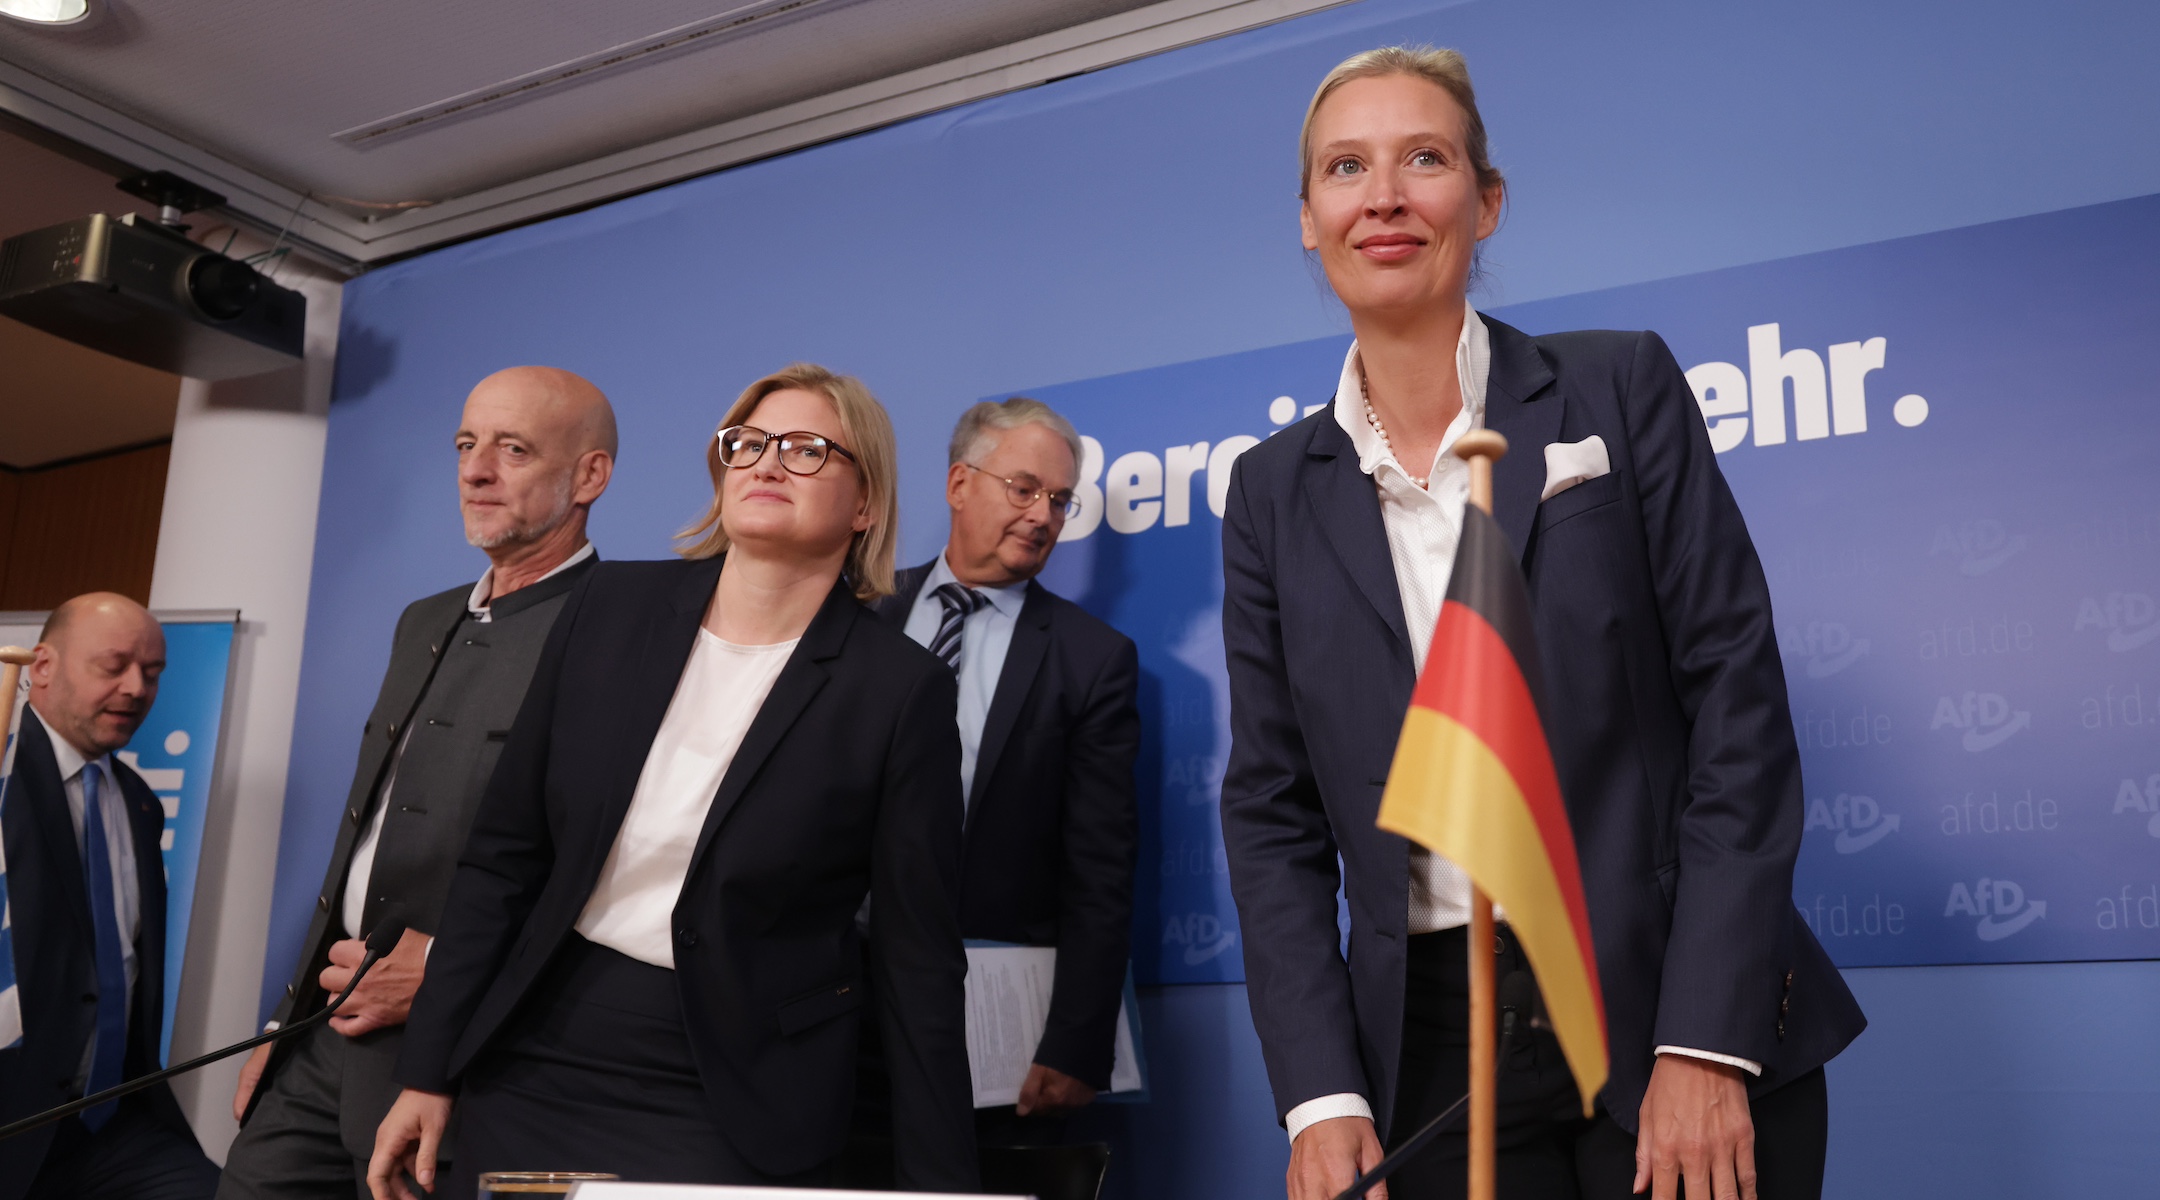 Alice Weidel, right, co-leader of the AfD party, arrives at a press conference in Berlin with party candidates from state elections, Oct. 9, 2023. (Sean Gallup/Getty Images)